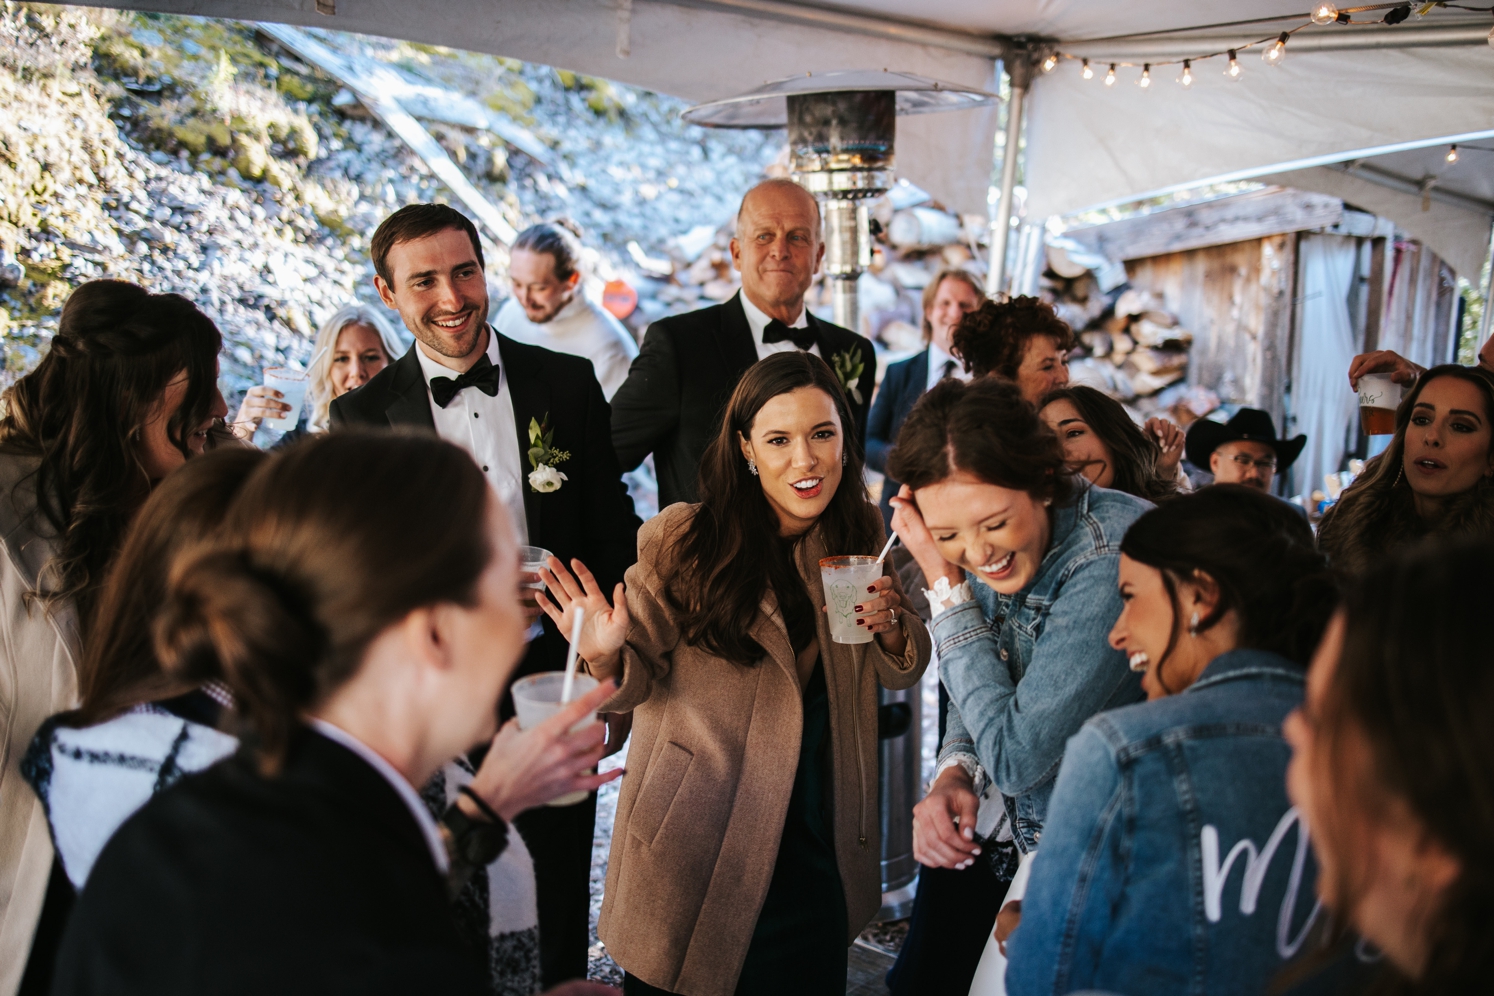 Brides dancing with wedding guests at Telluride wedding reception | McArthur Weddings and Events